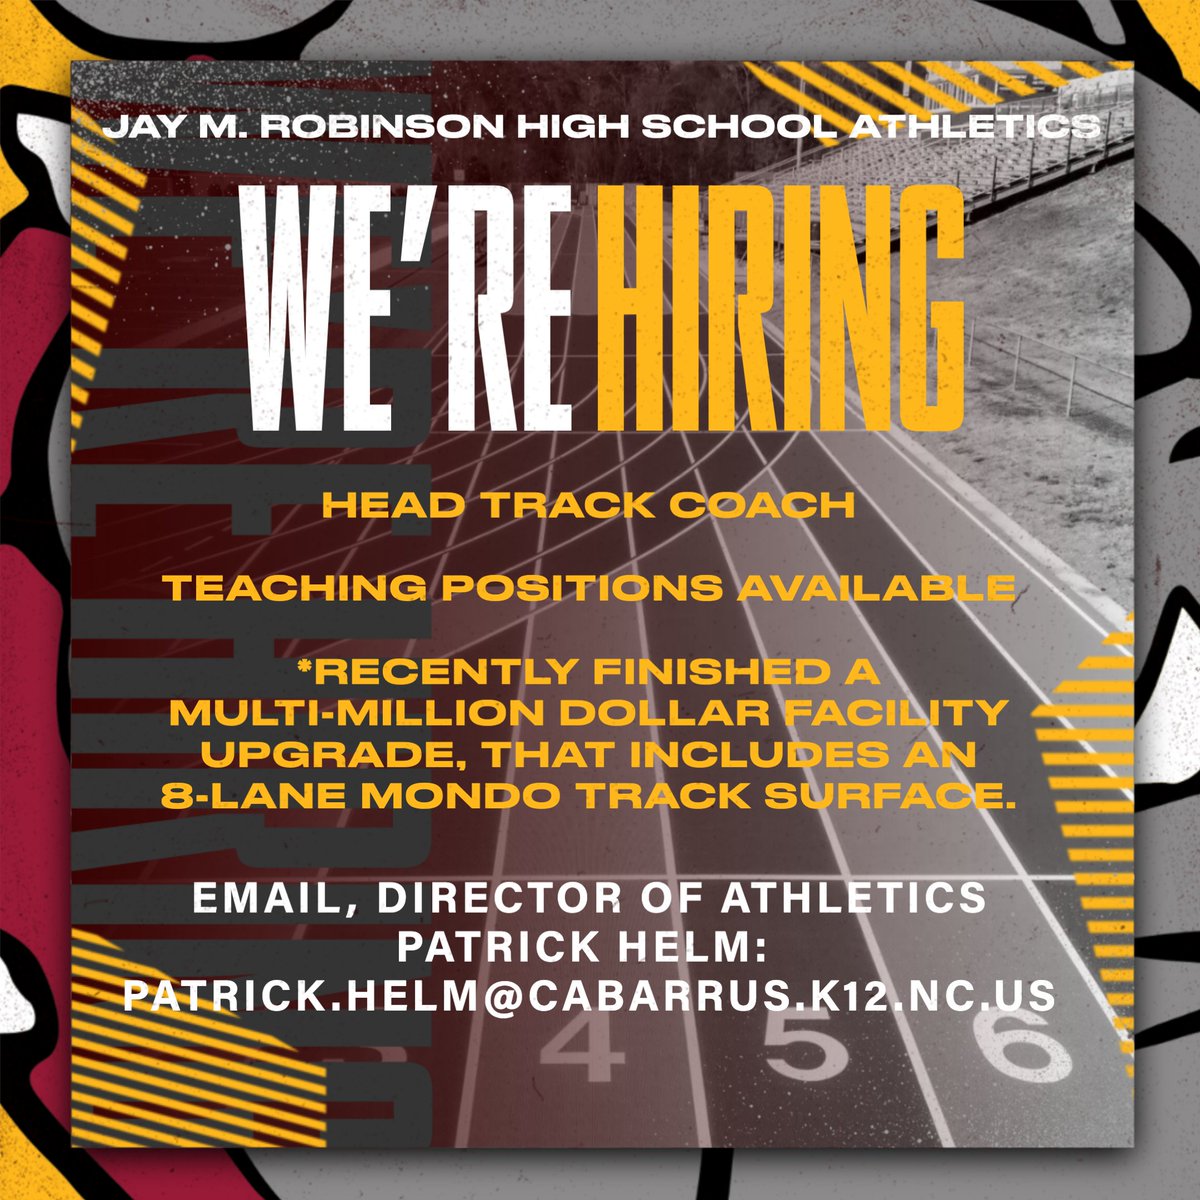 Robinson Athletics is hiring for a head track coach. Teaching positions are available. Interested applicants should email, director of athletics Patrick Helm. patrick.helm@cabarrus.k12.nc.us